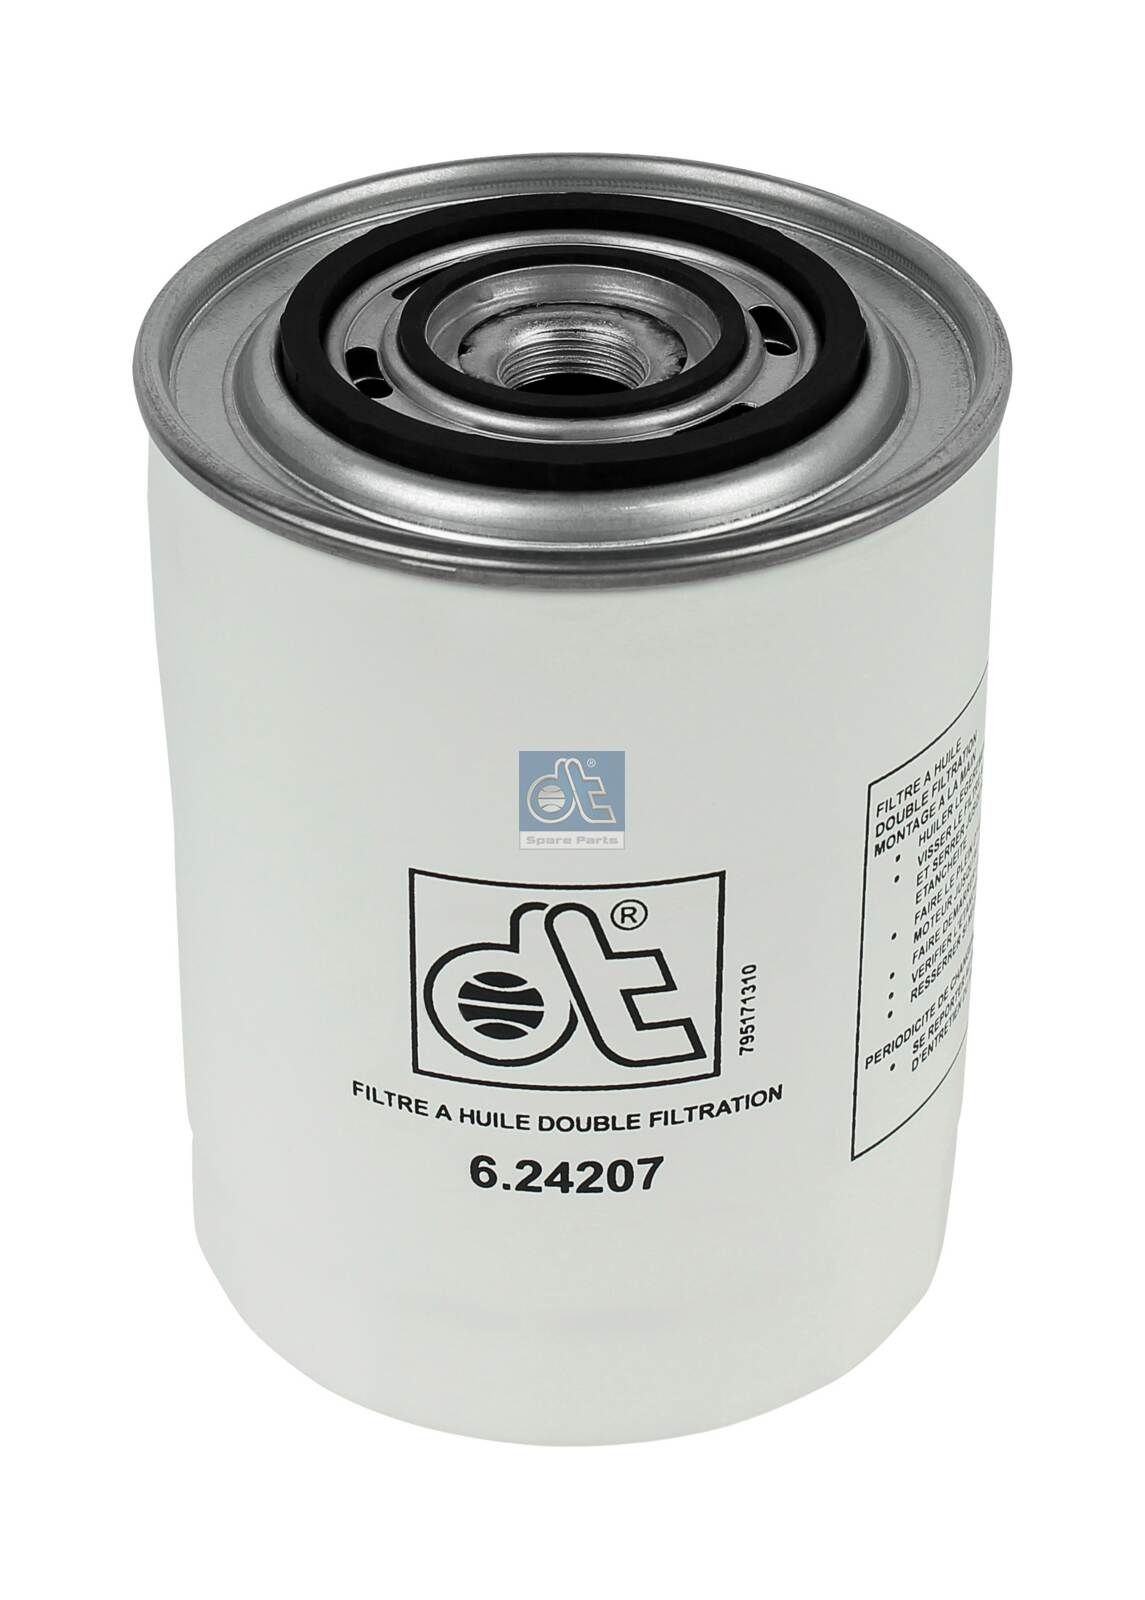 WP 1144 DT Spare Parts 6.24207 Oil filter 5025089